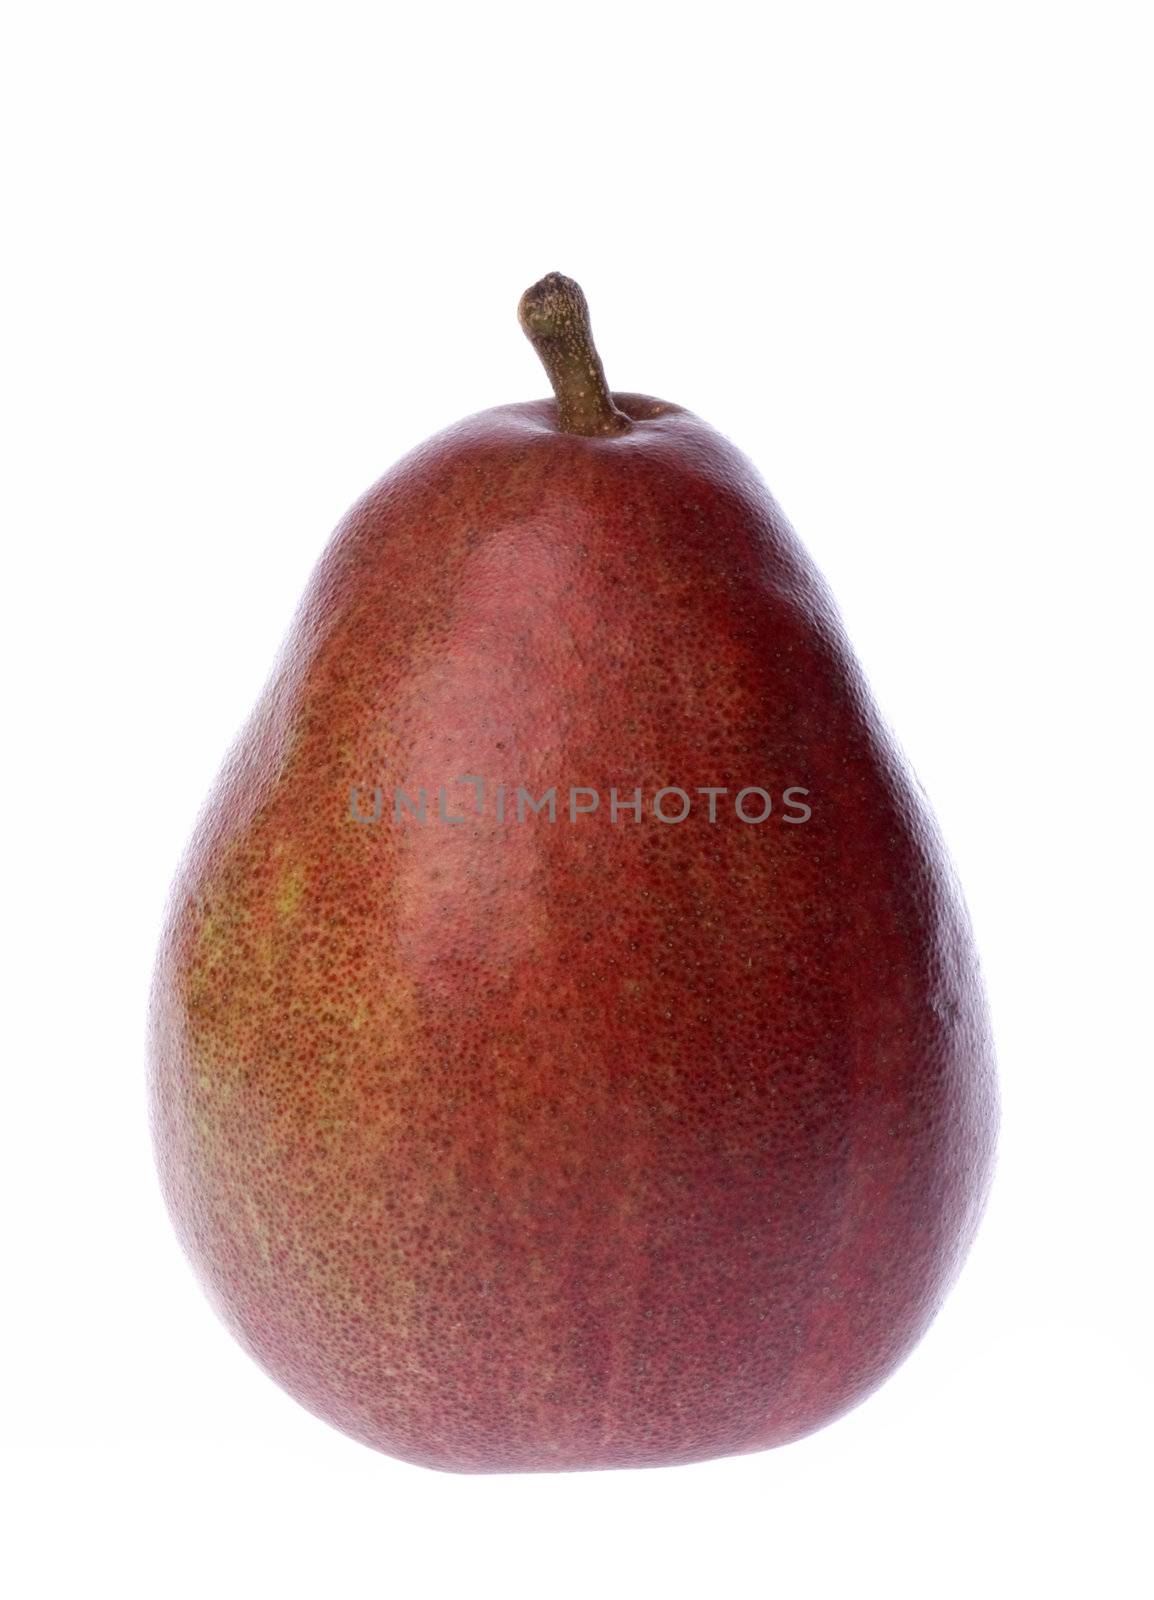 Isolated image of a fresh red apple.